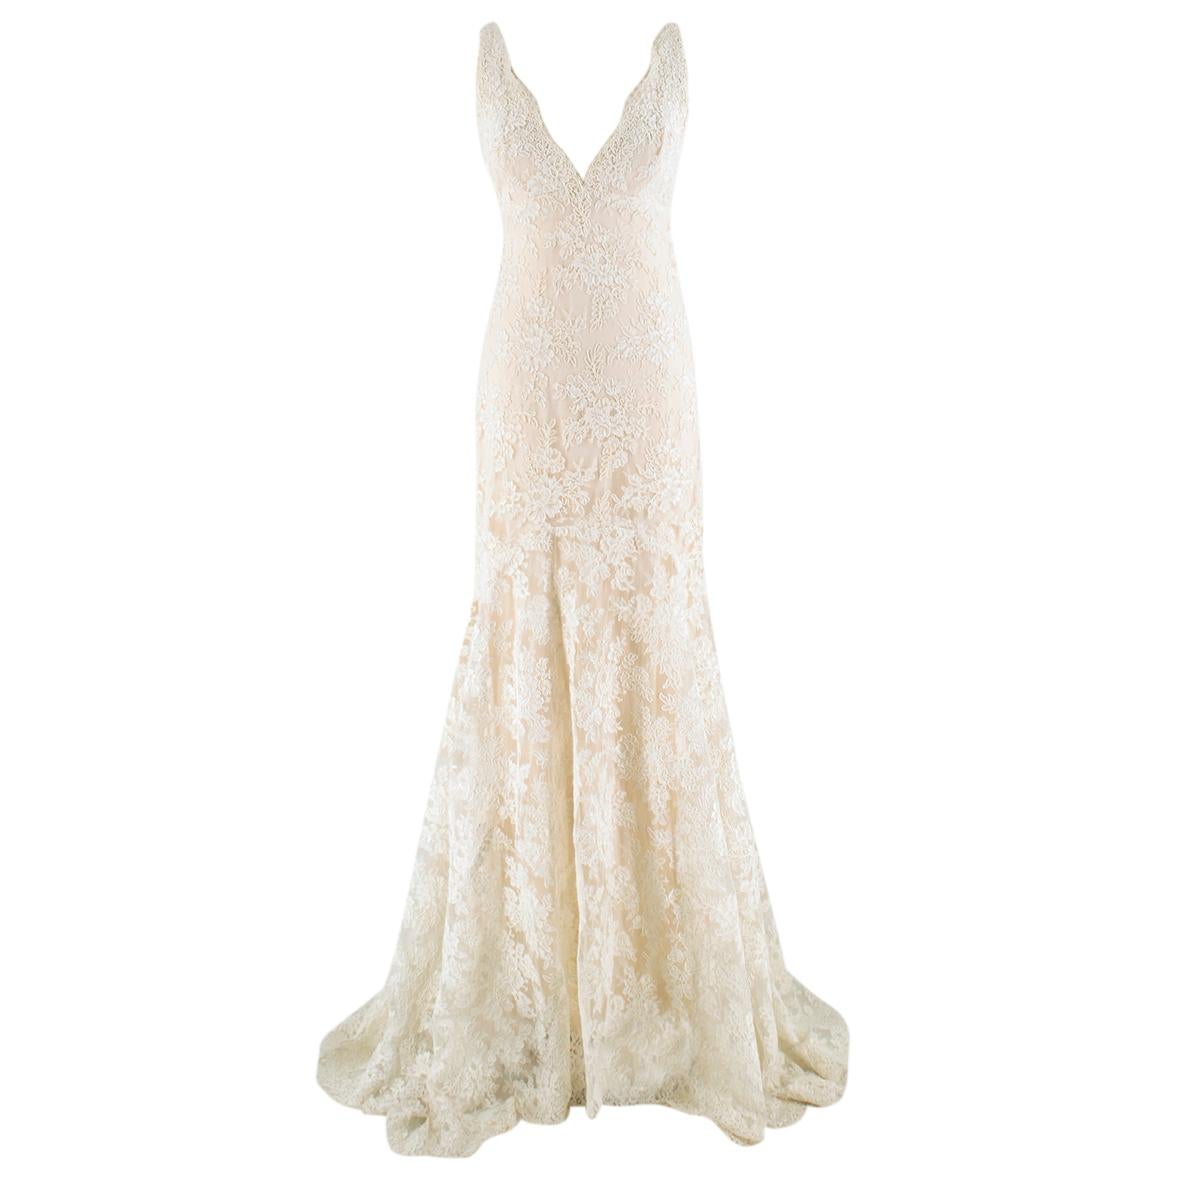 Monique Lhuillier Cream Lace Trumpet Wedding Dress

- Cream lace wedding dress
- Silk lining 
- Hidden zip fastening to the back and hook
- Sleeveless
- V neckline and back 
- Trumpet style 

Please note, these items are pre-owned and may show some